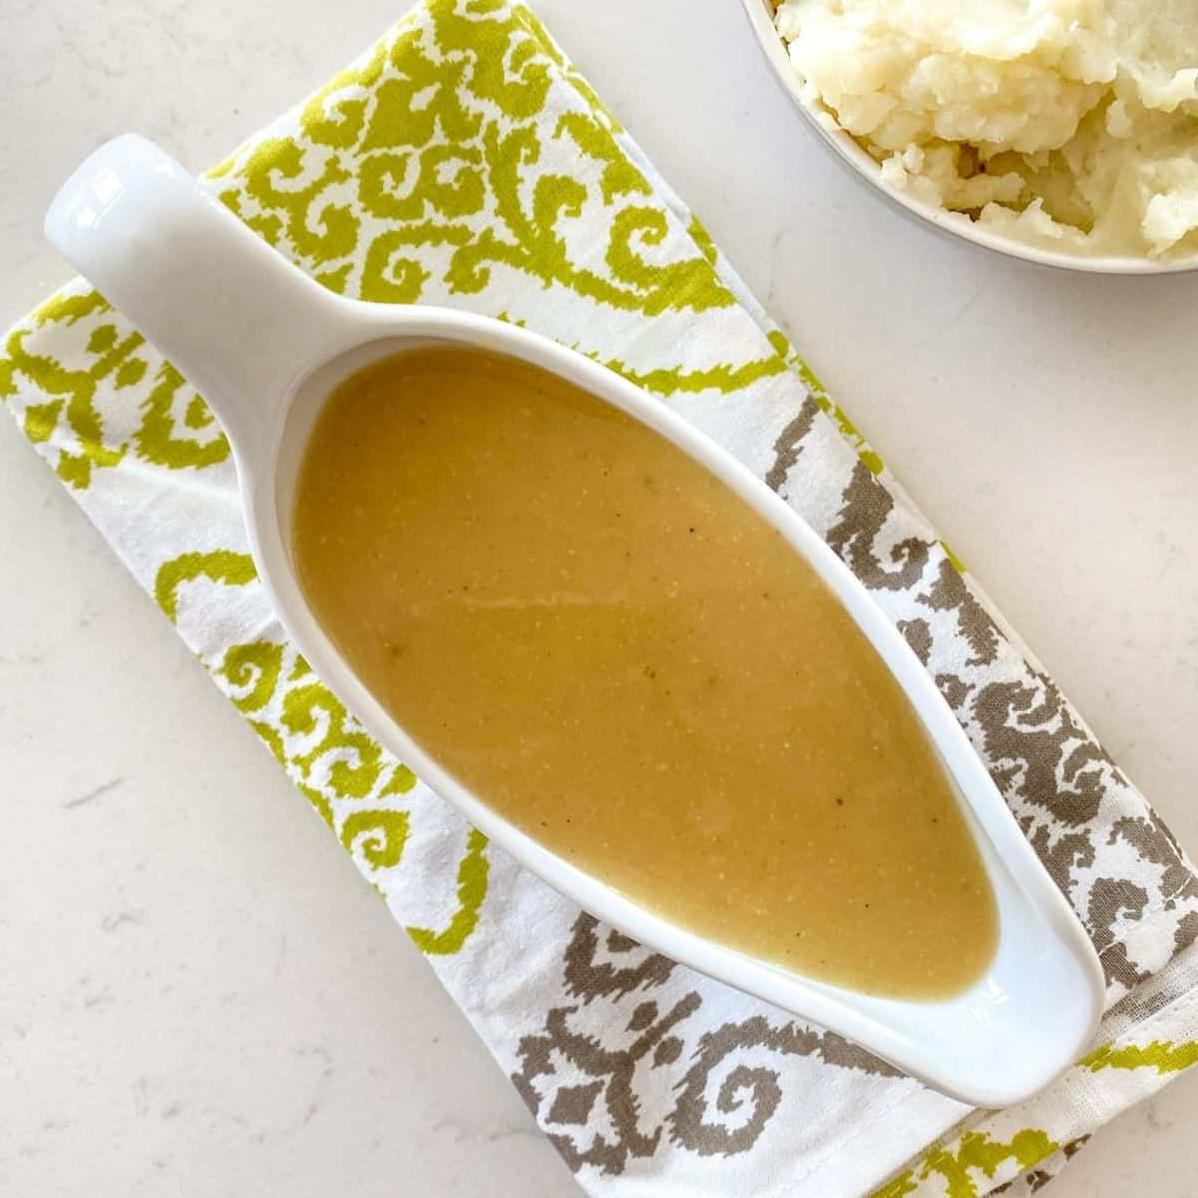  Pour this deliciously creamy miso gravy on roasted vegetables and elevate your dish.